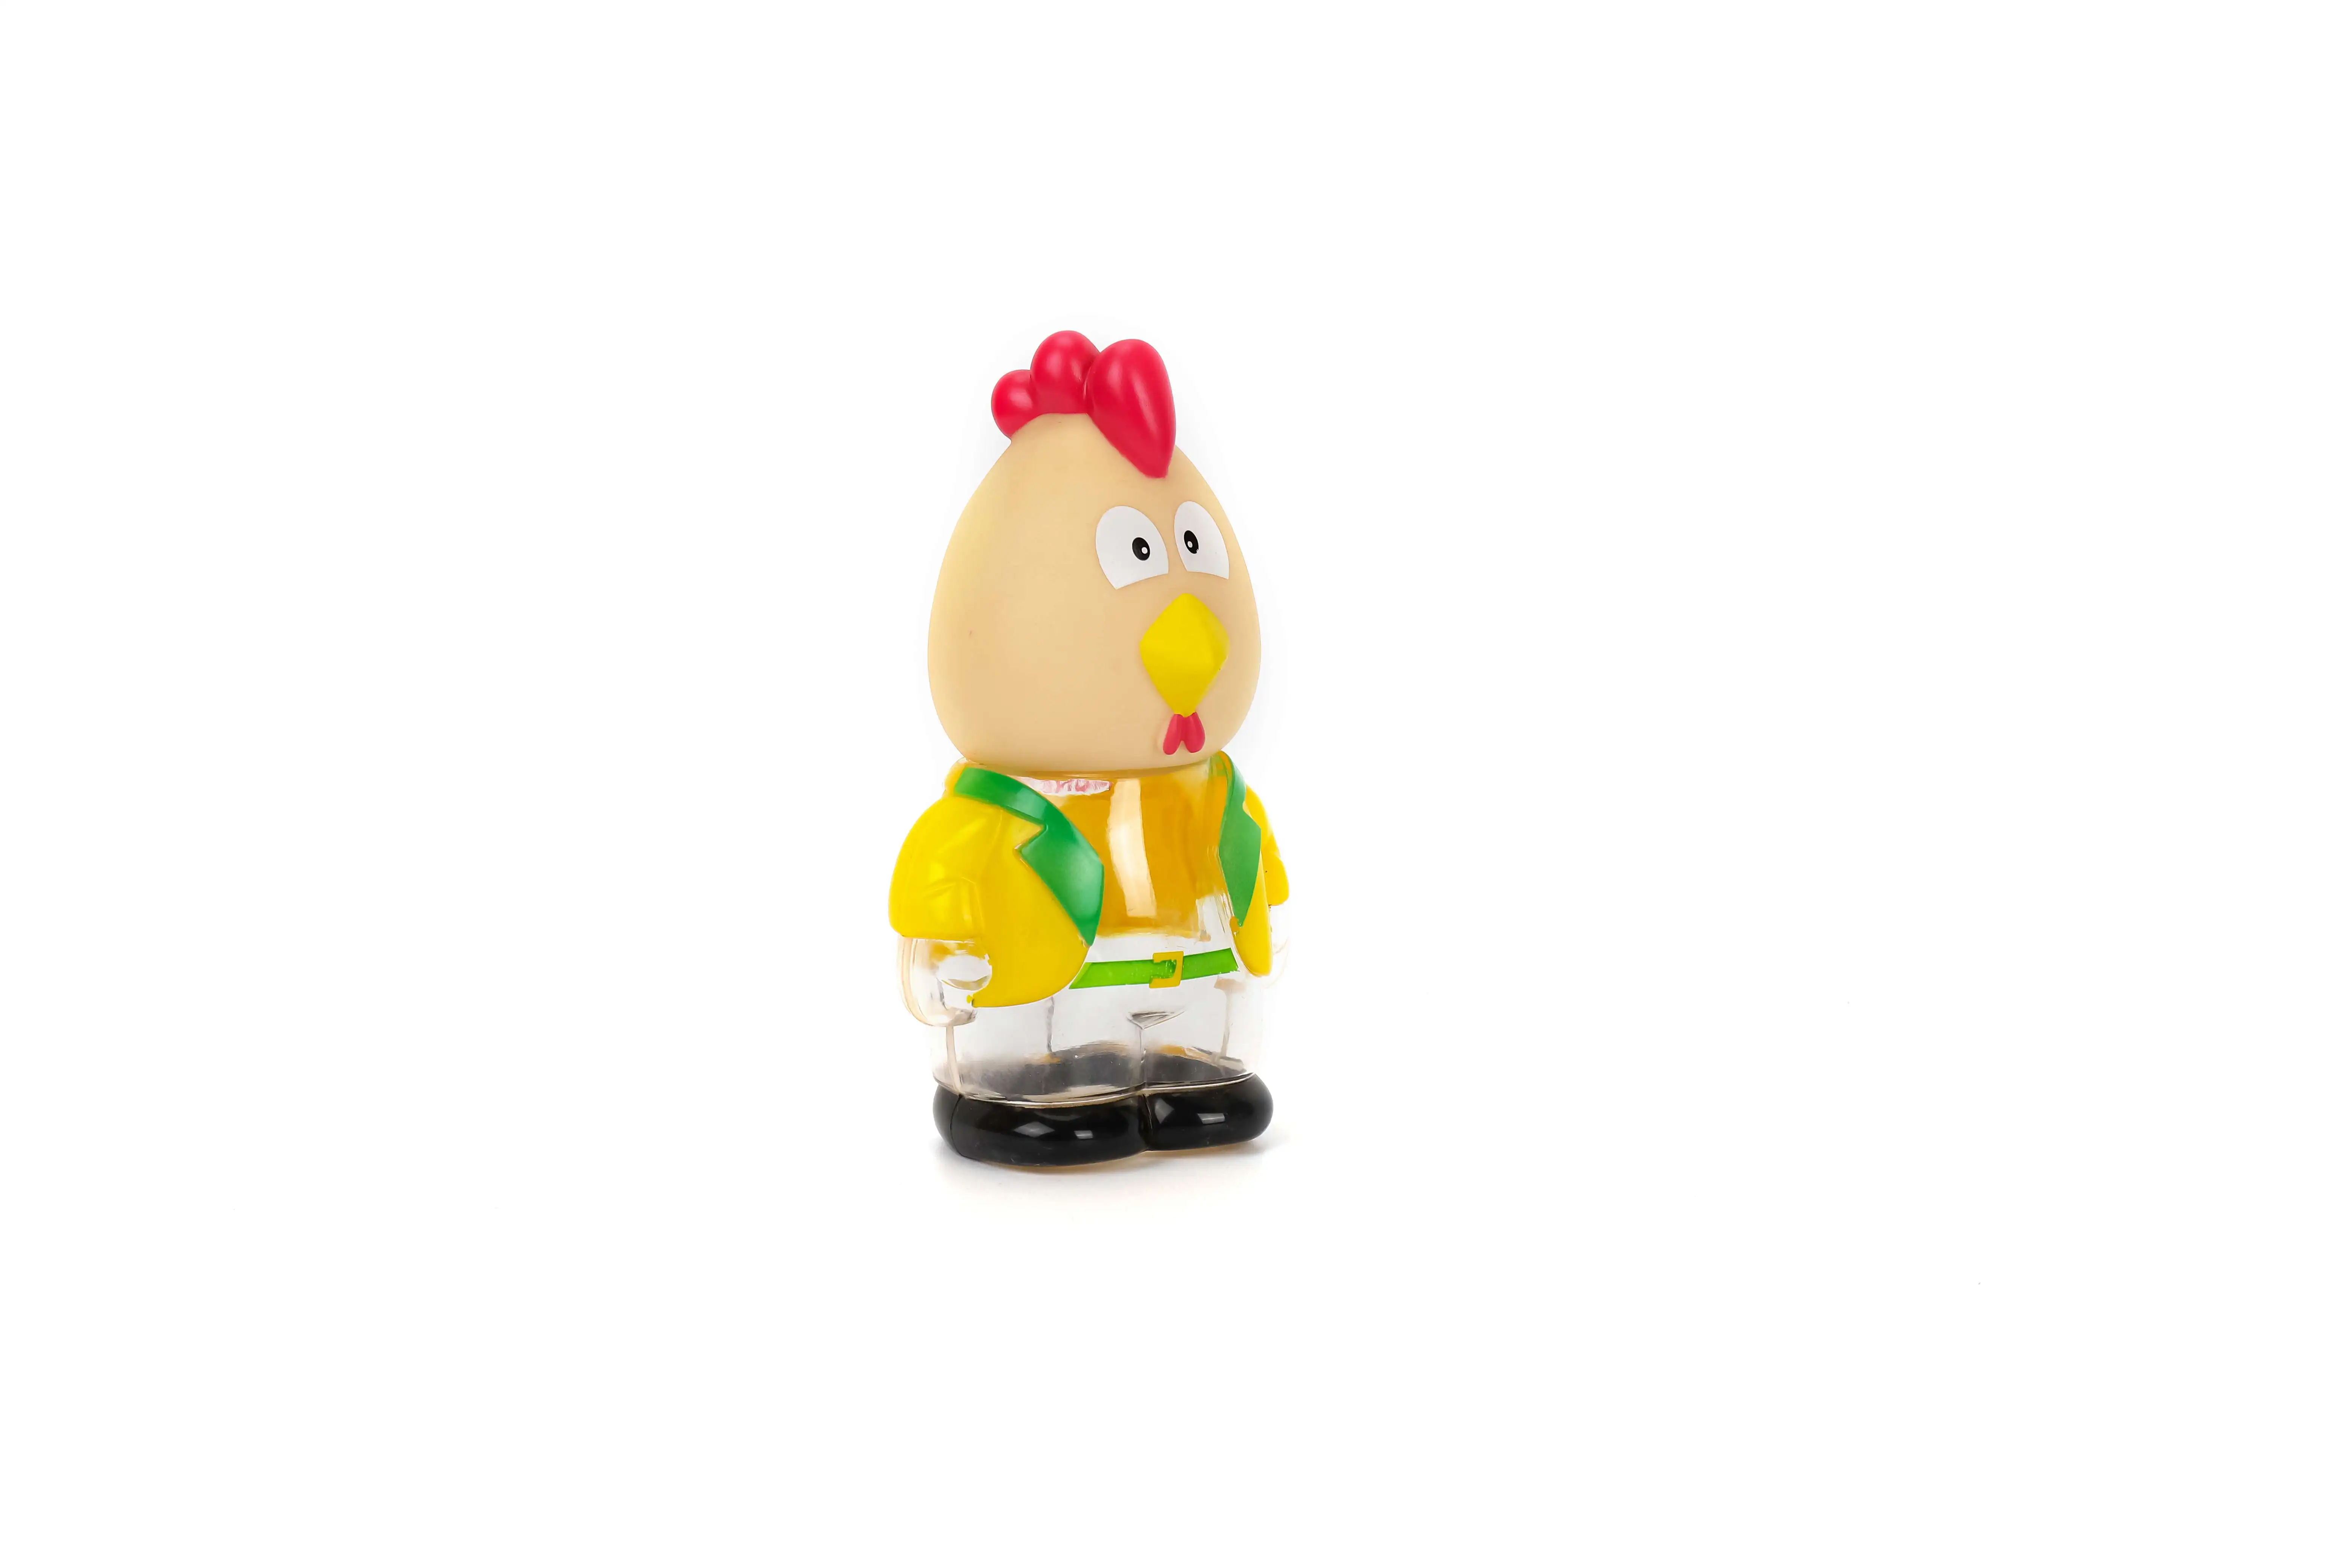 Cute Cartoon Chicken Candy Box Plastic Craft Pvc Christmas Party Craft Ornaments Accessory Children Toy Gift